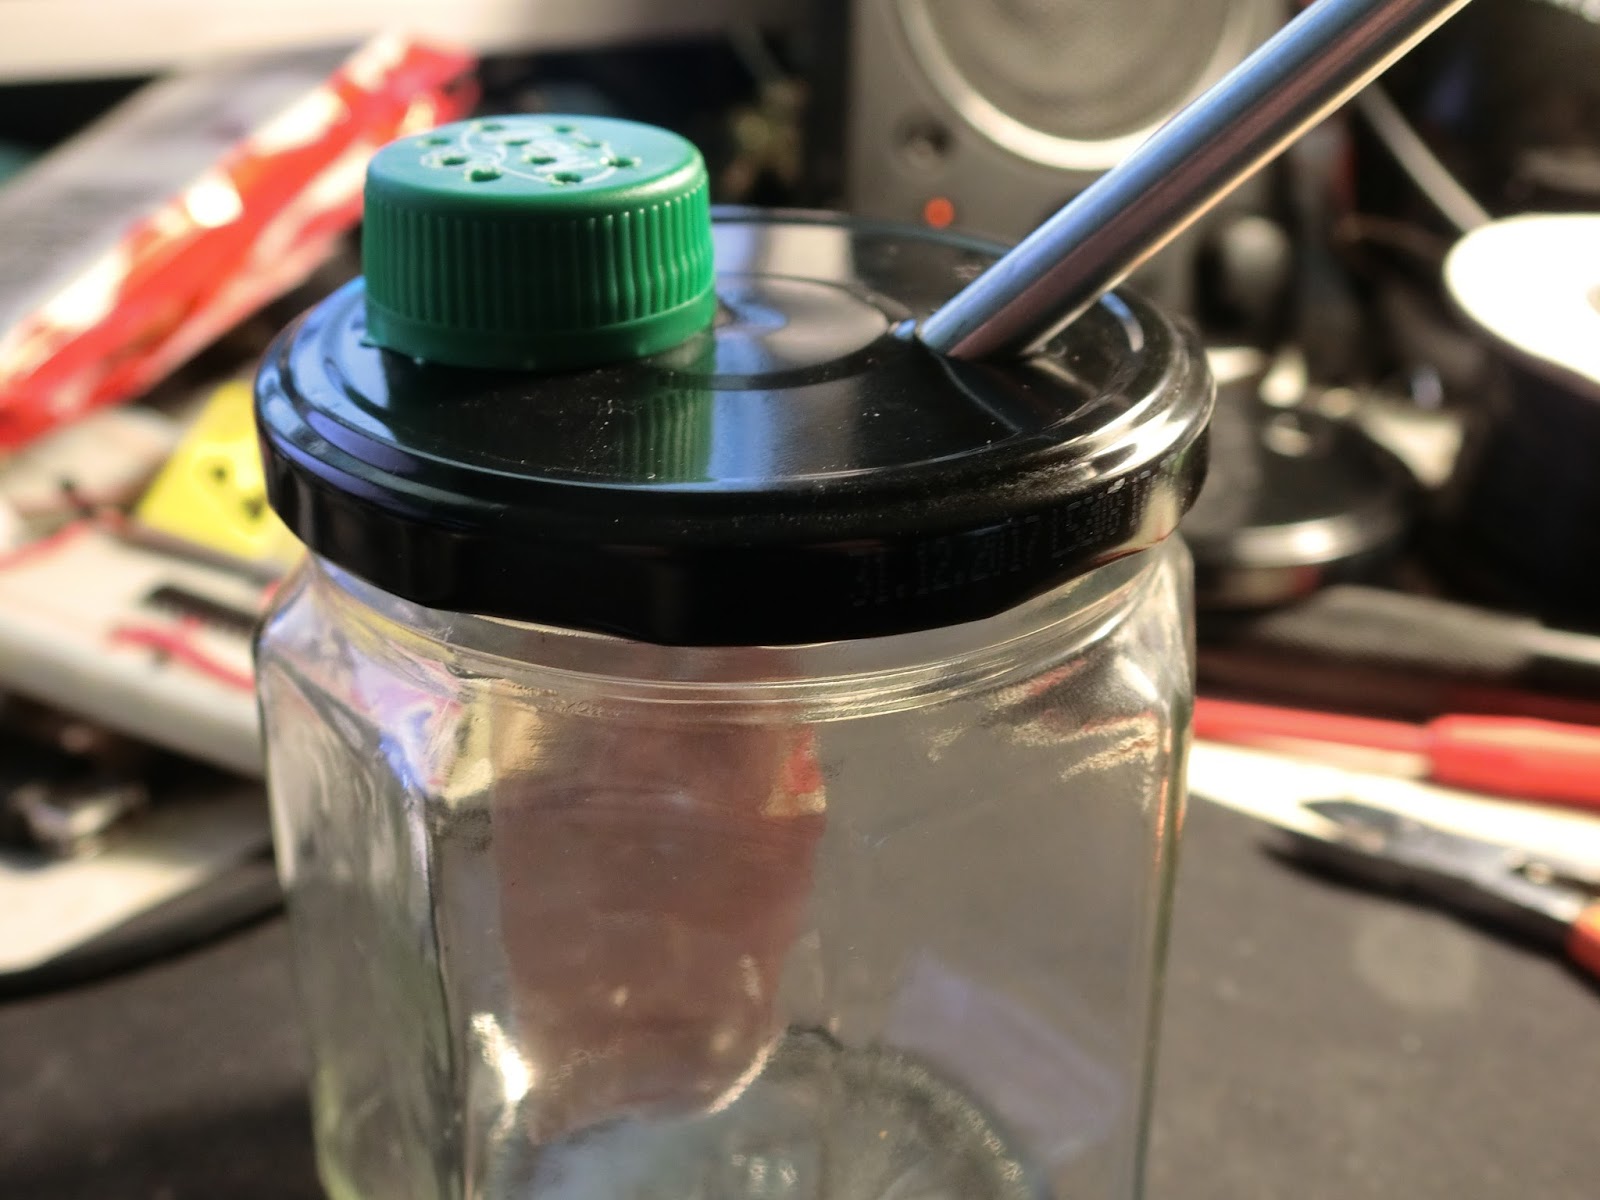 I built a jerry-rigged airbrush cleaning pot out of a spread jar